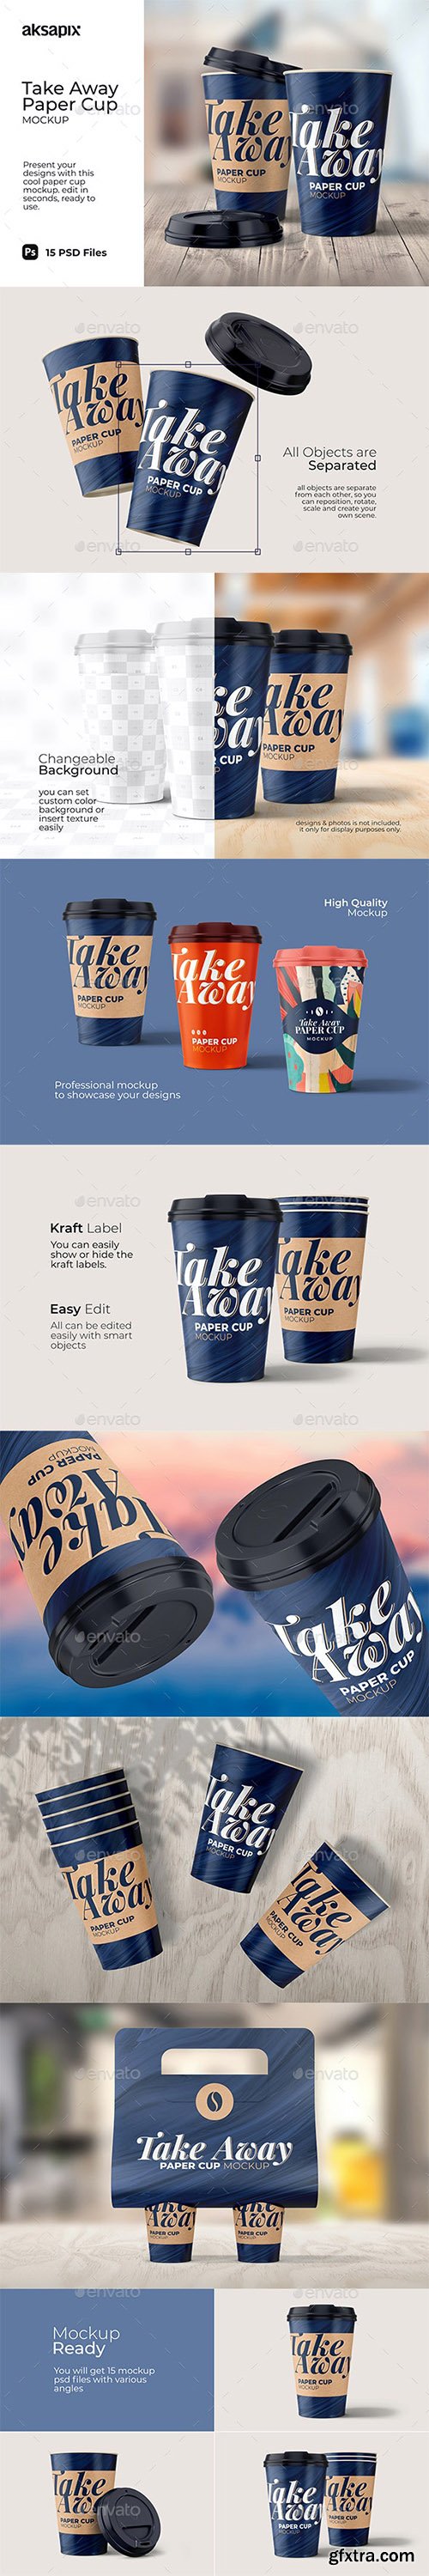 GraphicRiver - Take Away Paper Cup - Mockup 29600205